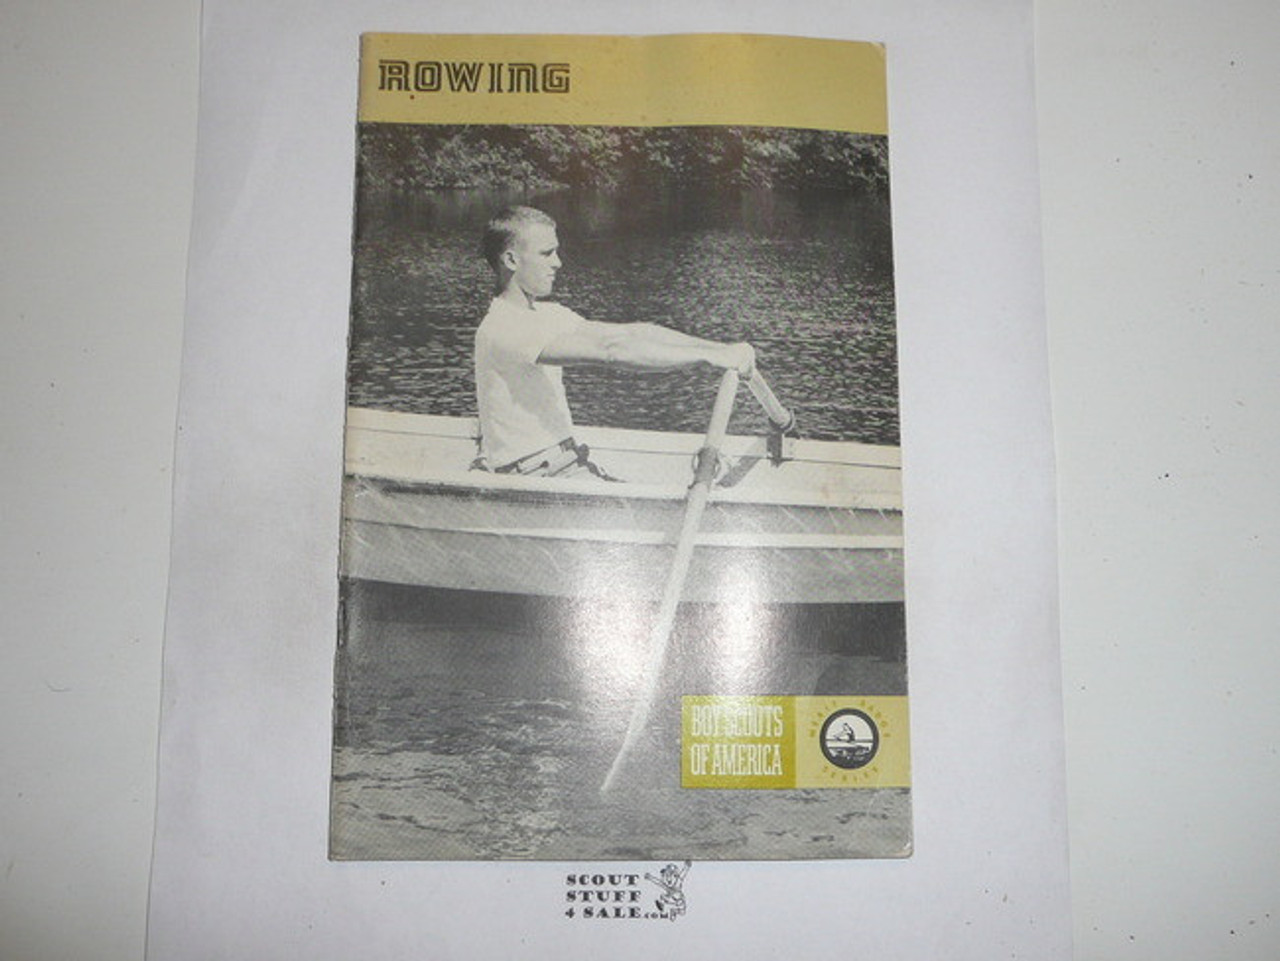 Rowing Merit Badge Pamphlet, Type 8, Green Band Cover, 1-74 Printing